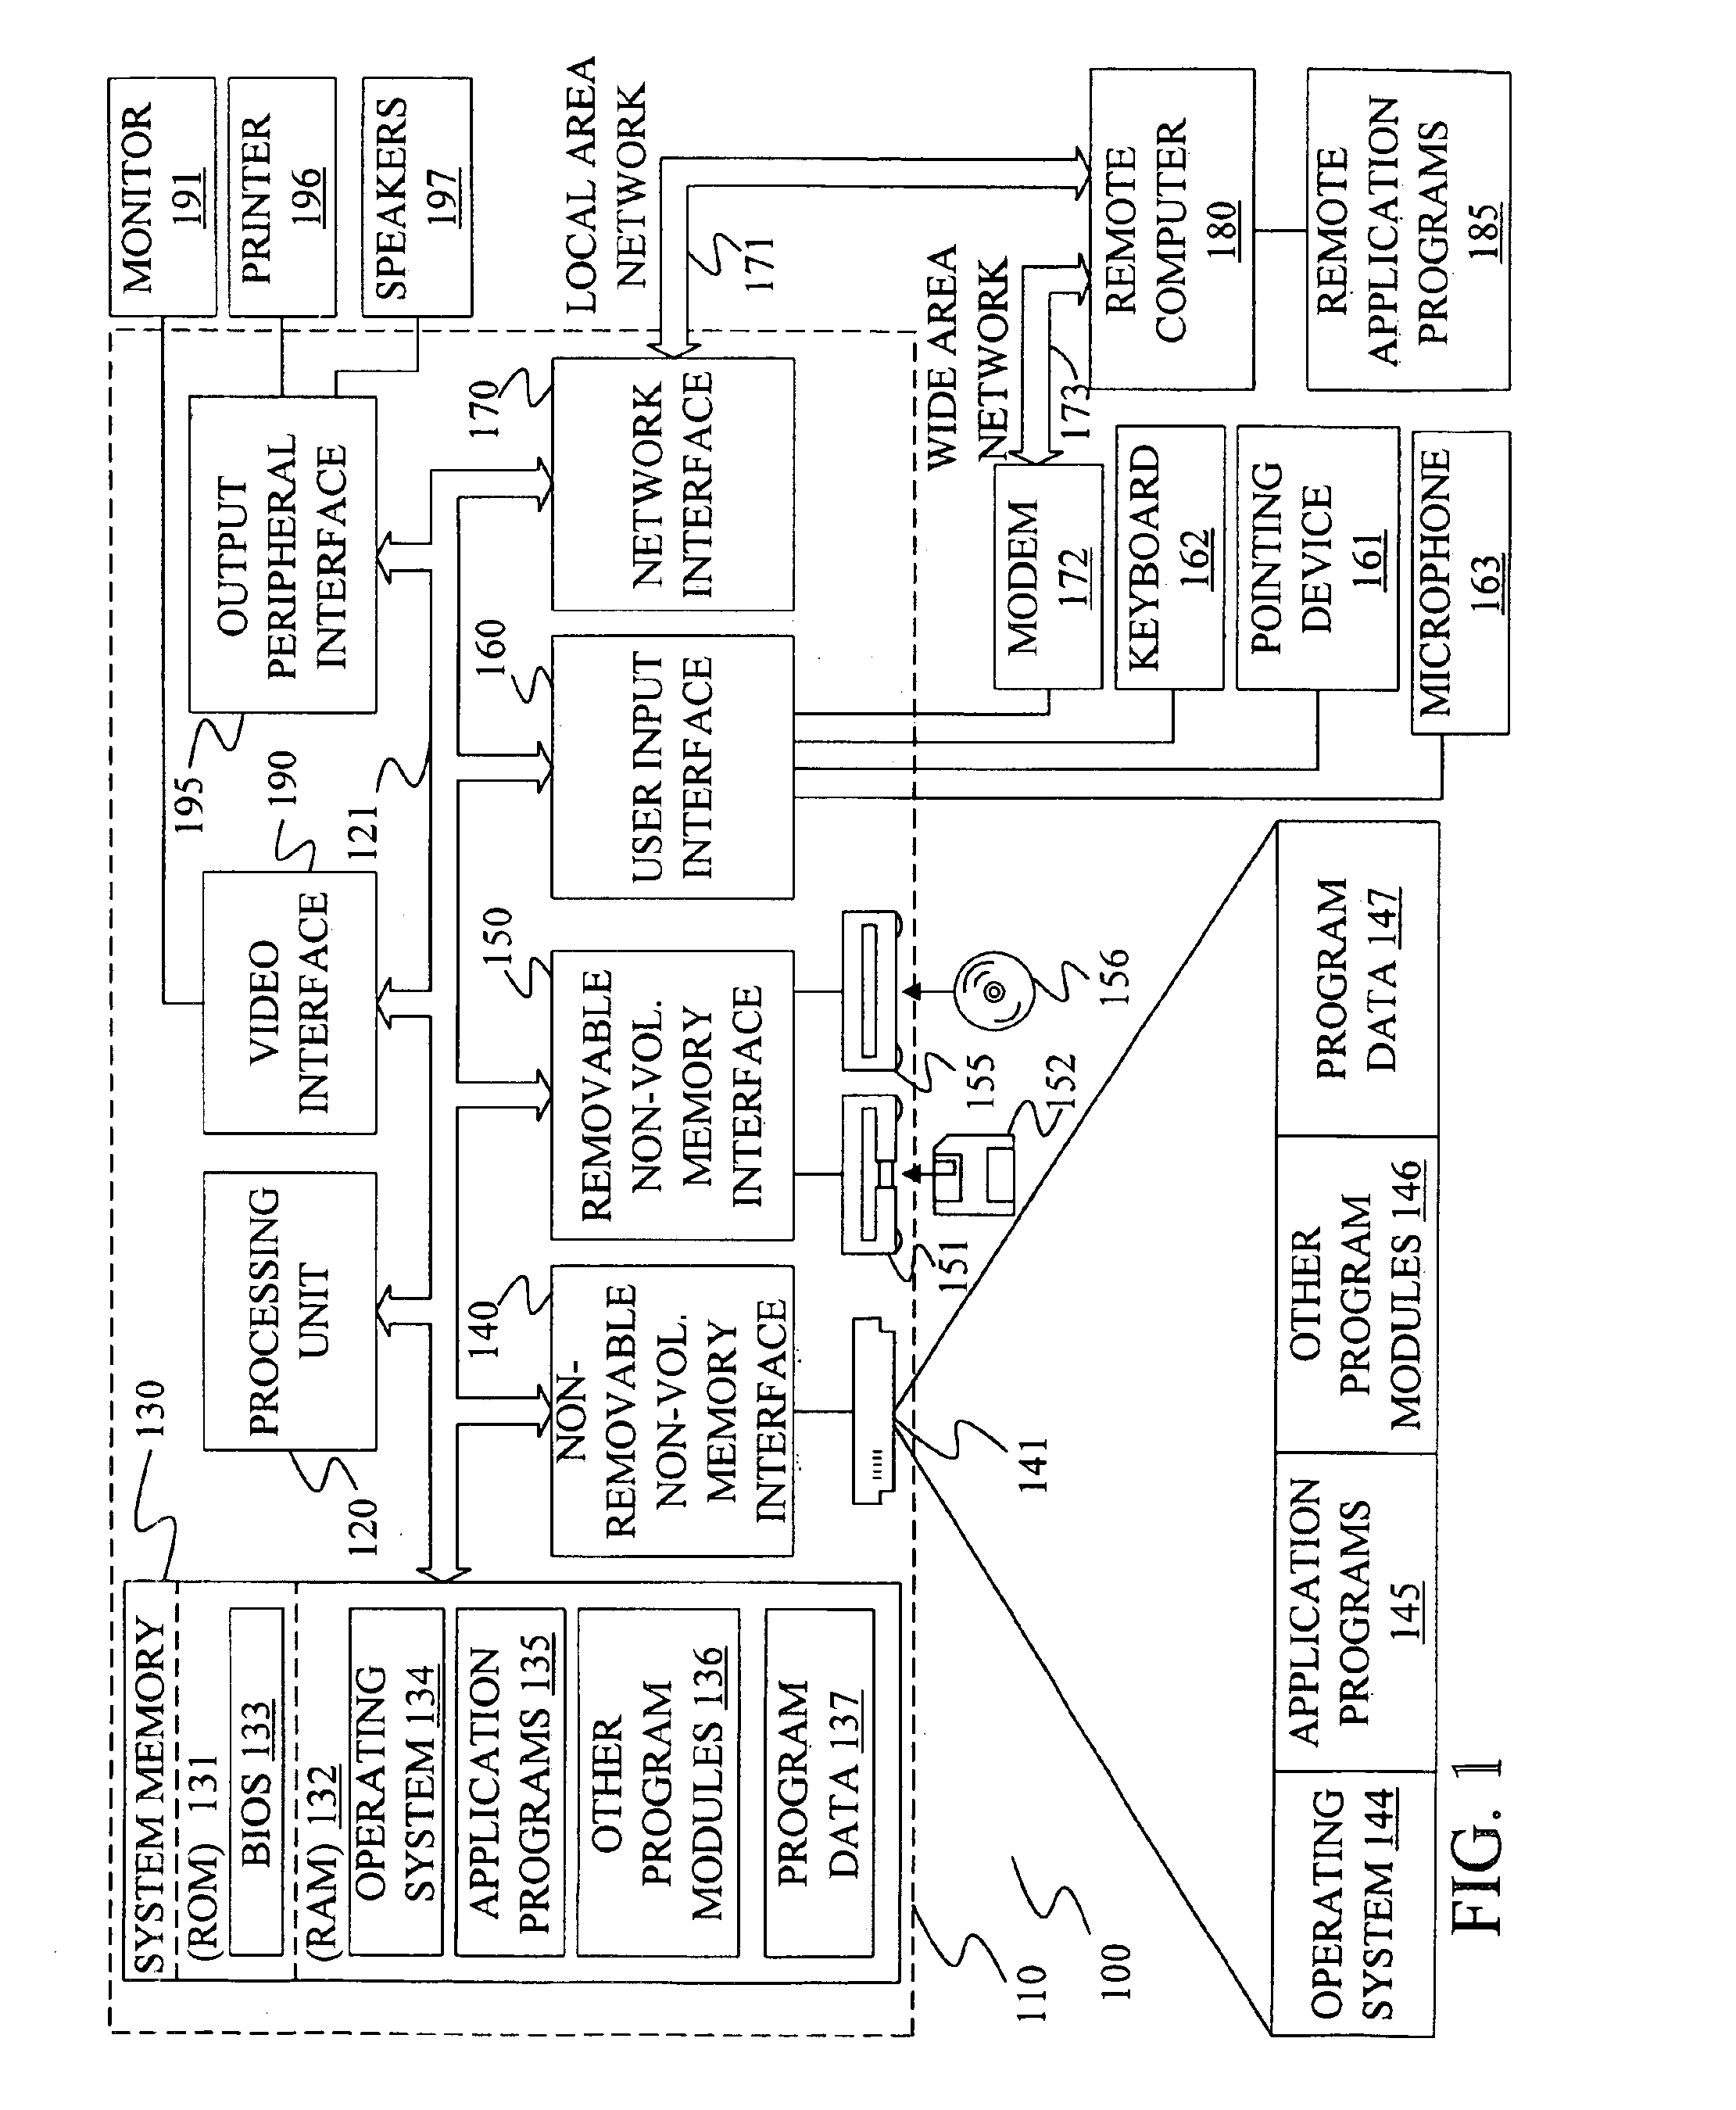 Method for adding phonetic descriptions to a speech recognition lexicon